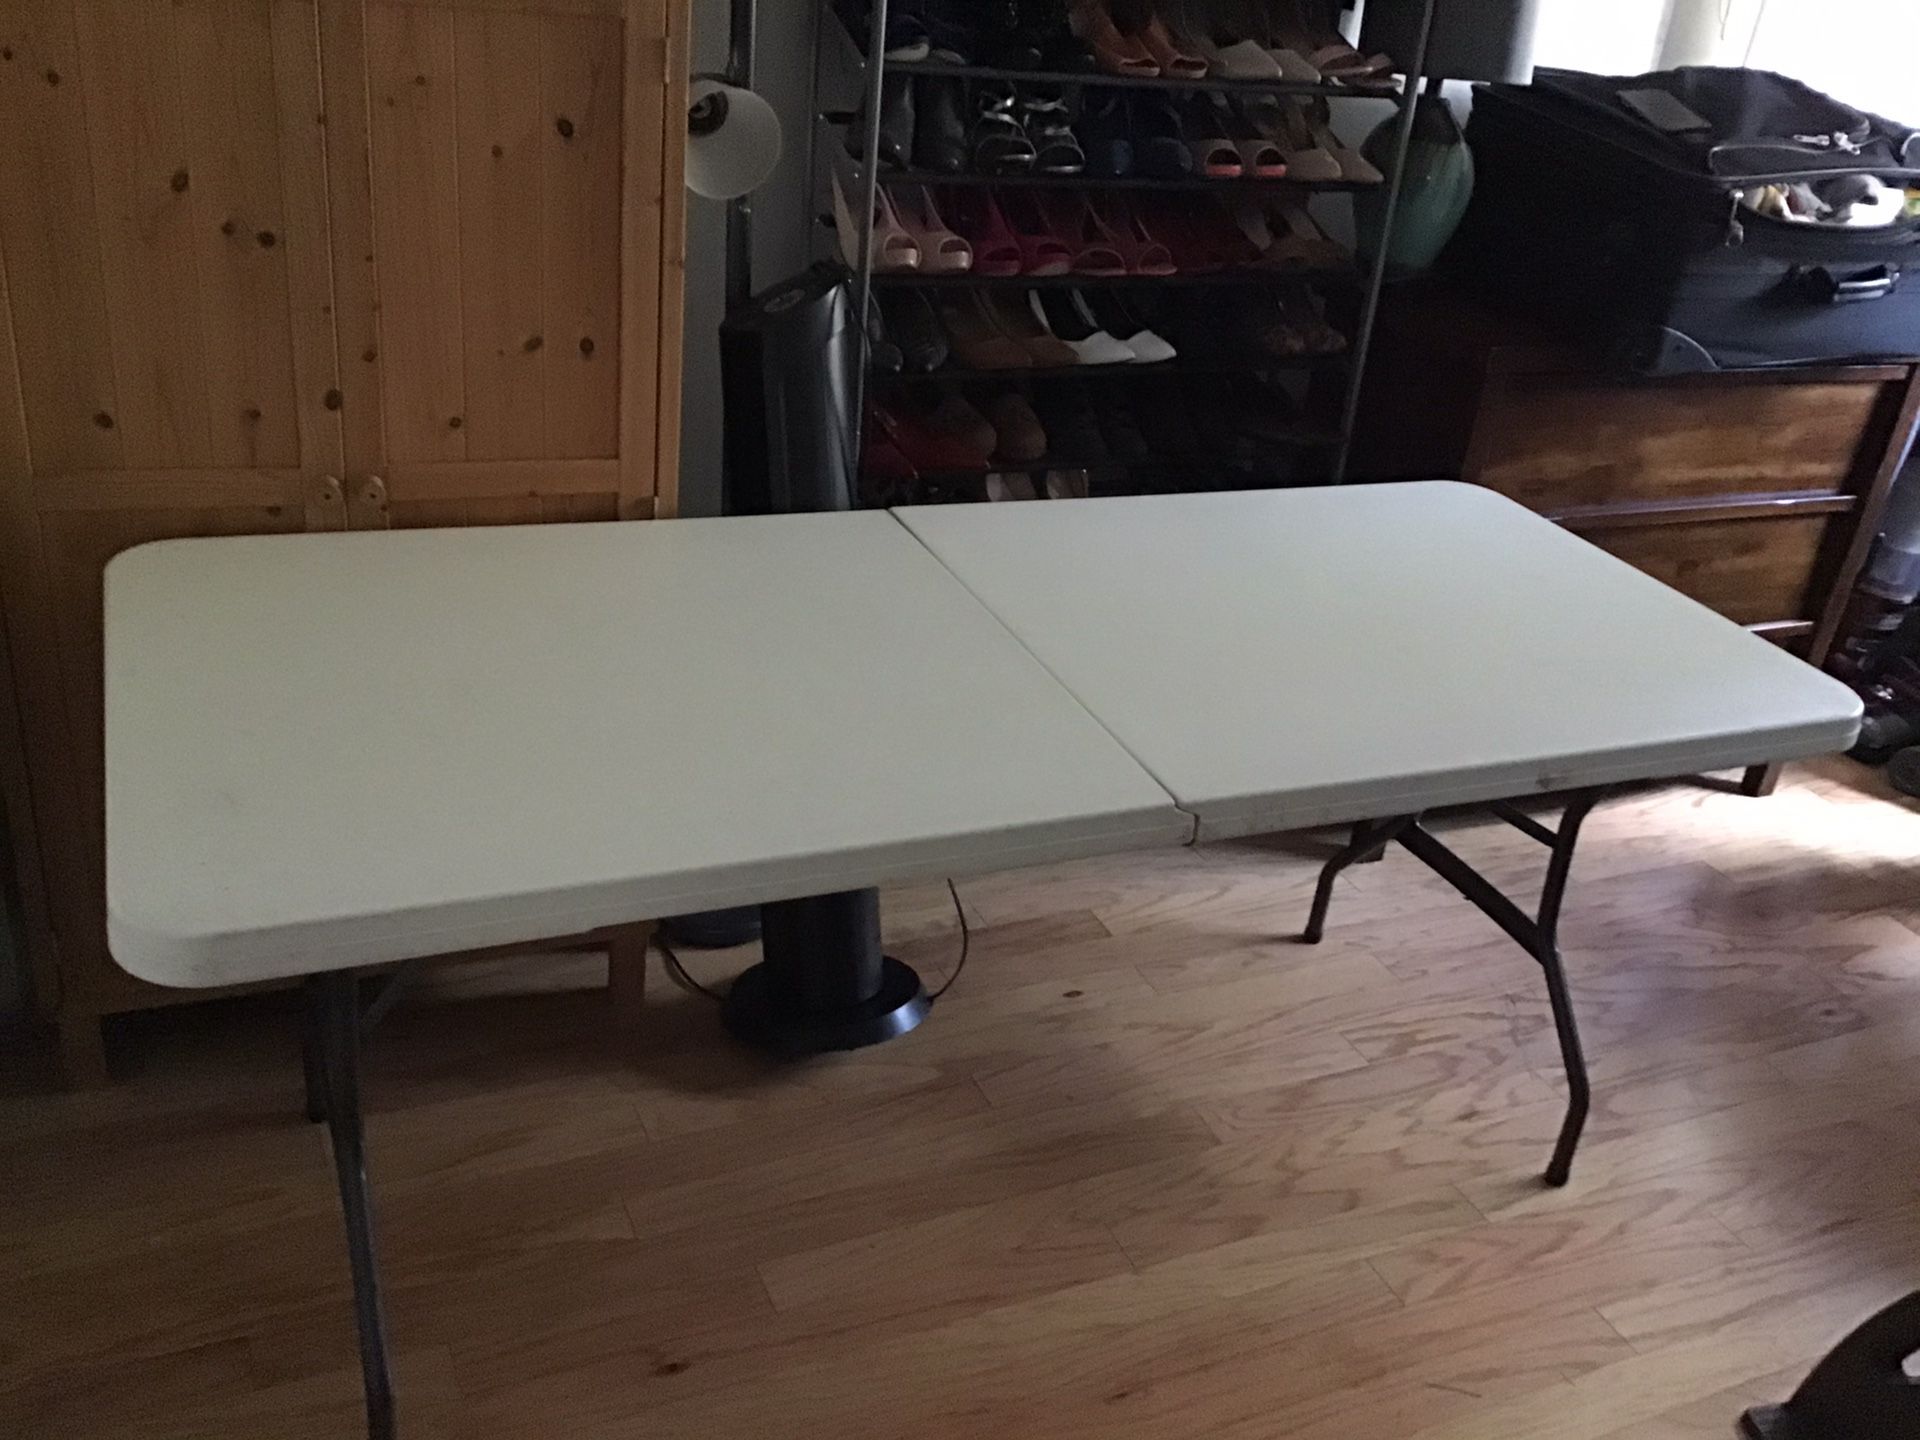 Table. 9 ft. Good condition